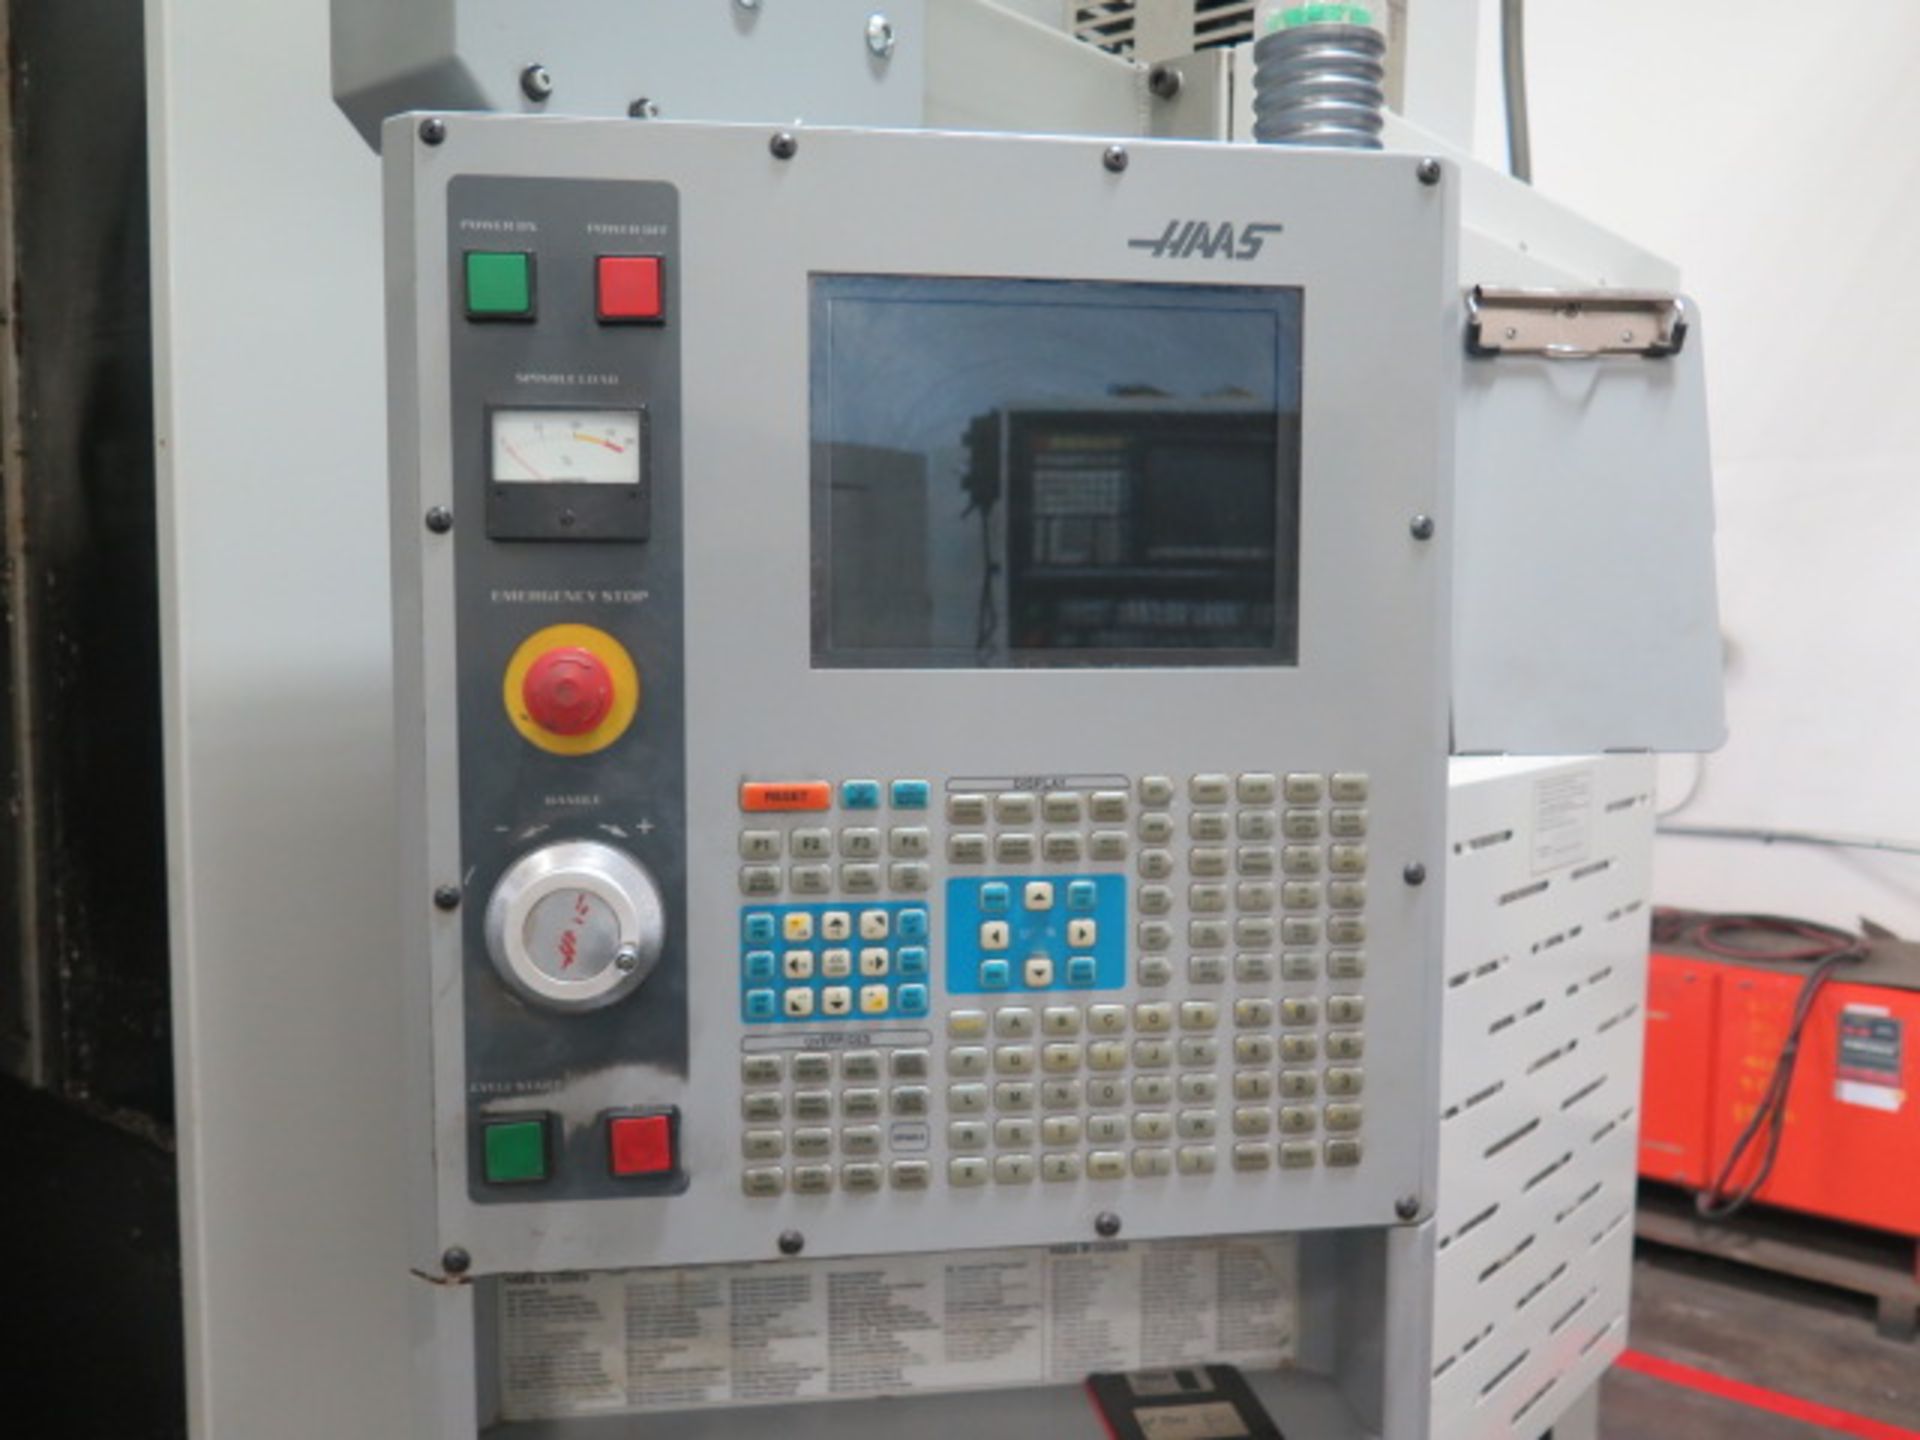 2003 Haas MDC-1 Dual Pallet CNC Milling / Drilling Center s/n 32186 w/ Haas Controls, SOLD AS IS - Image 10 of 12